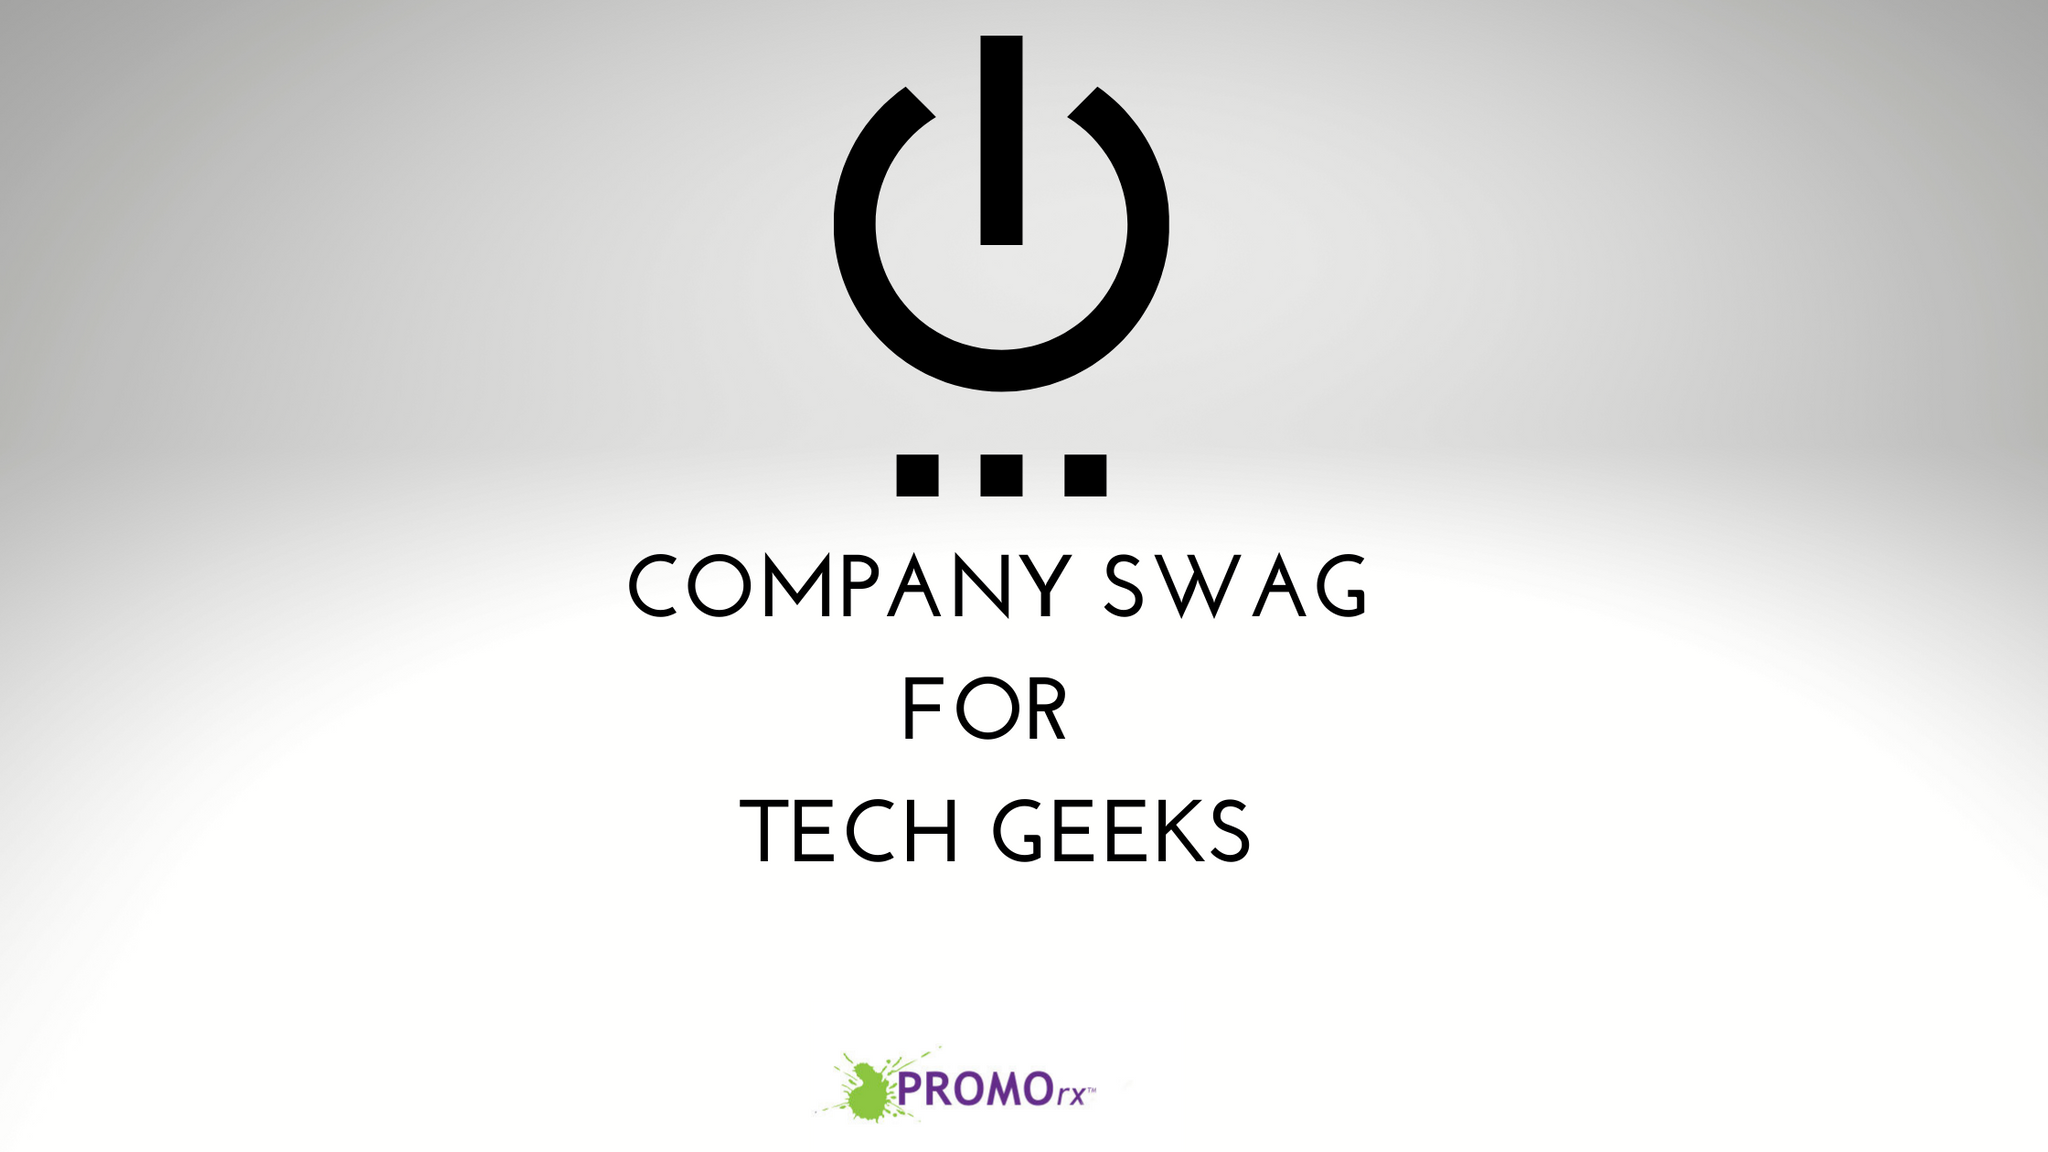 Company Swag for Tech Geeks